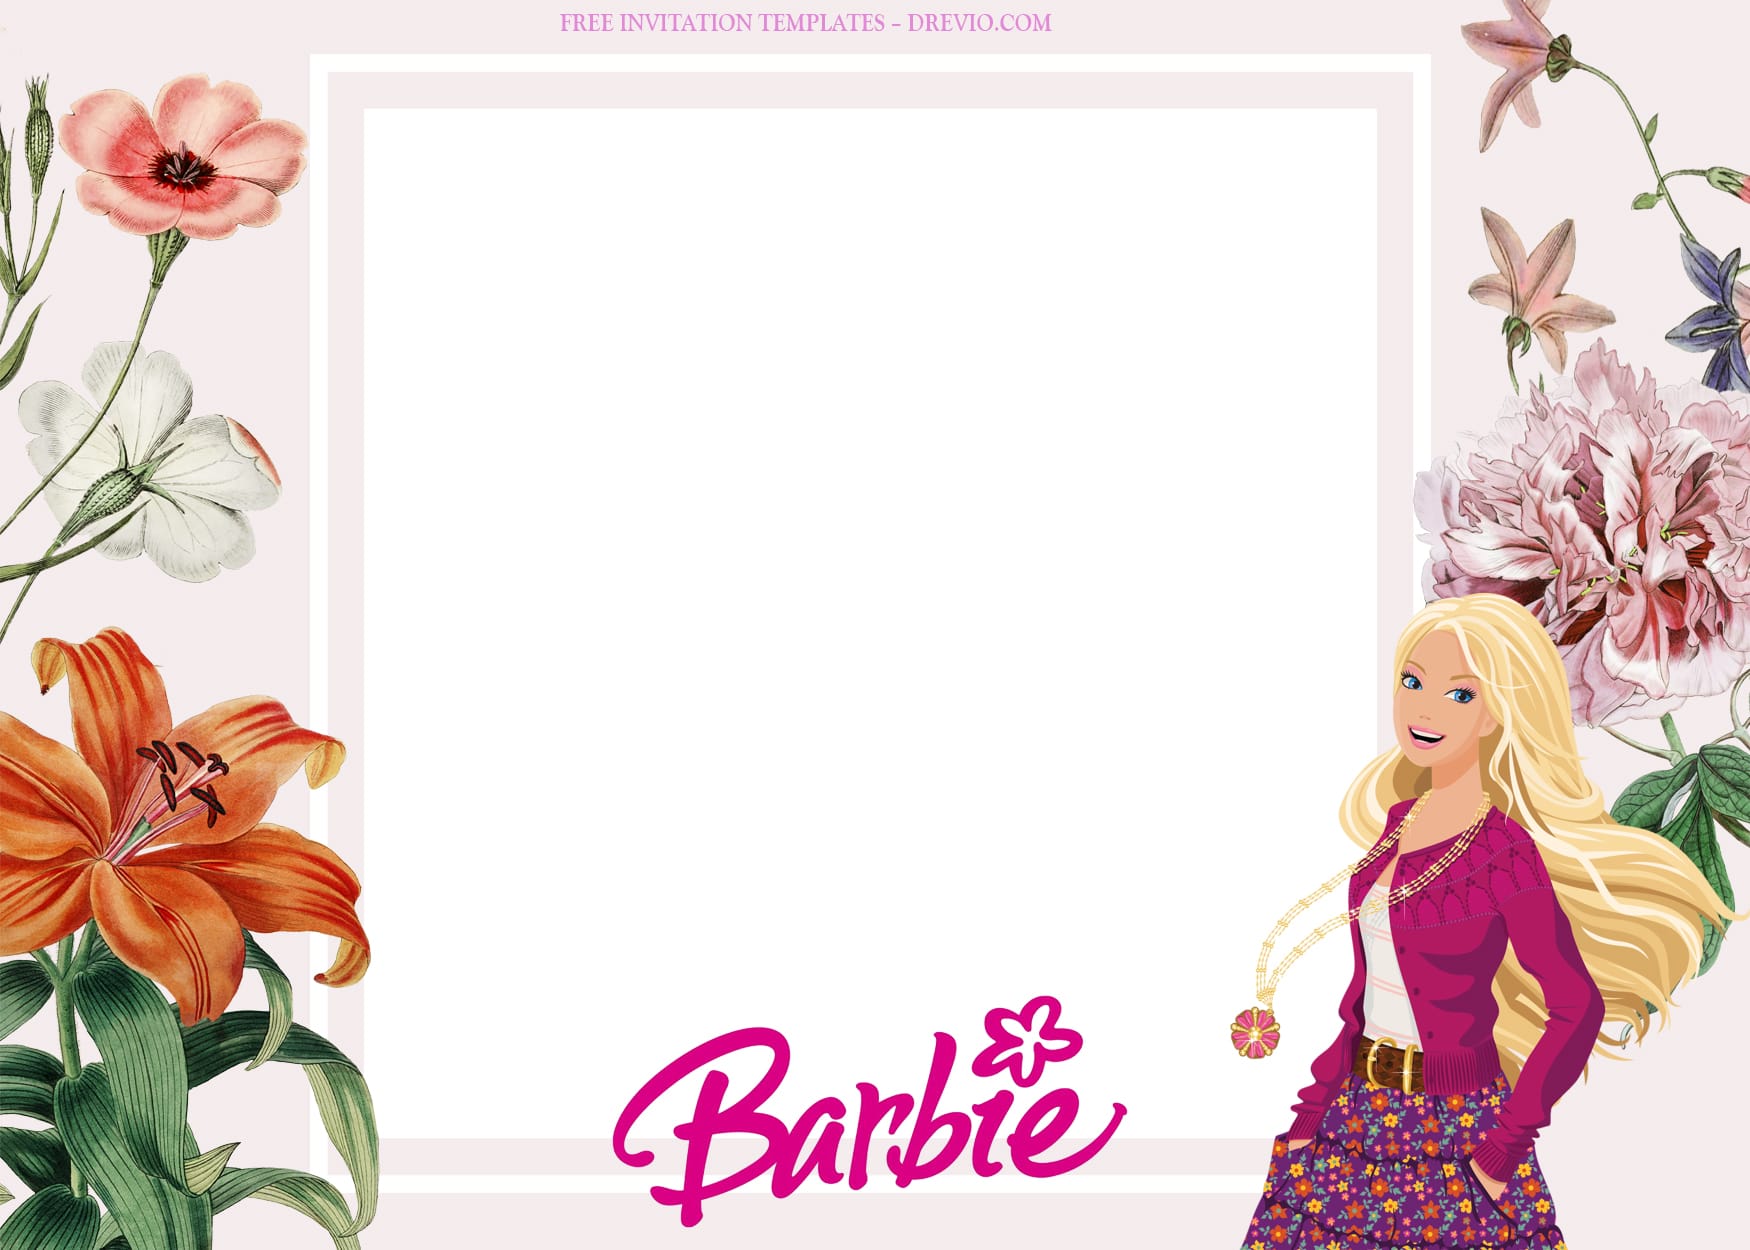 8+ A Good Day With Barbie Birthday Invitation Templates Type Four